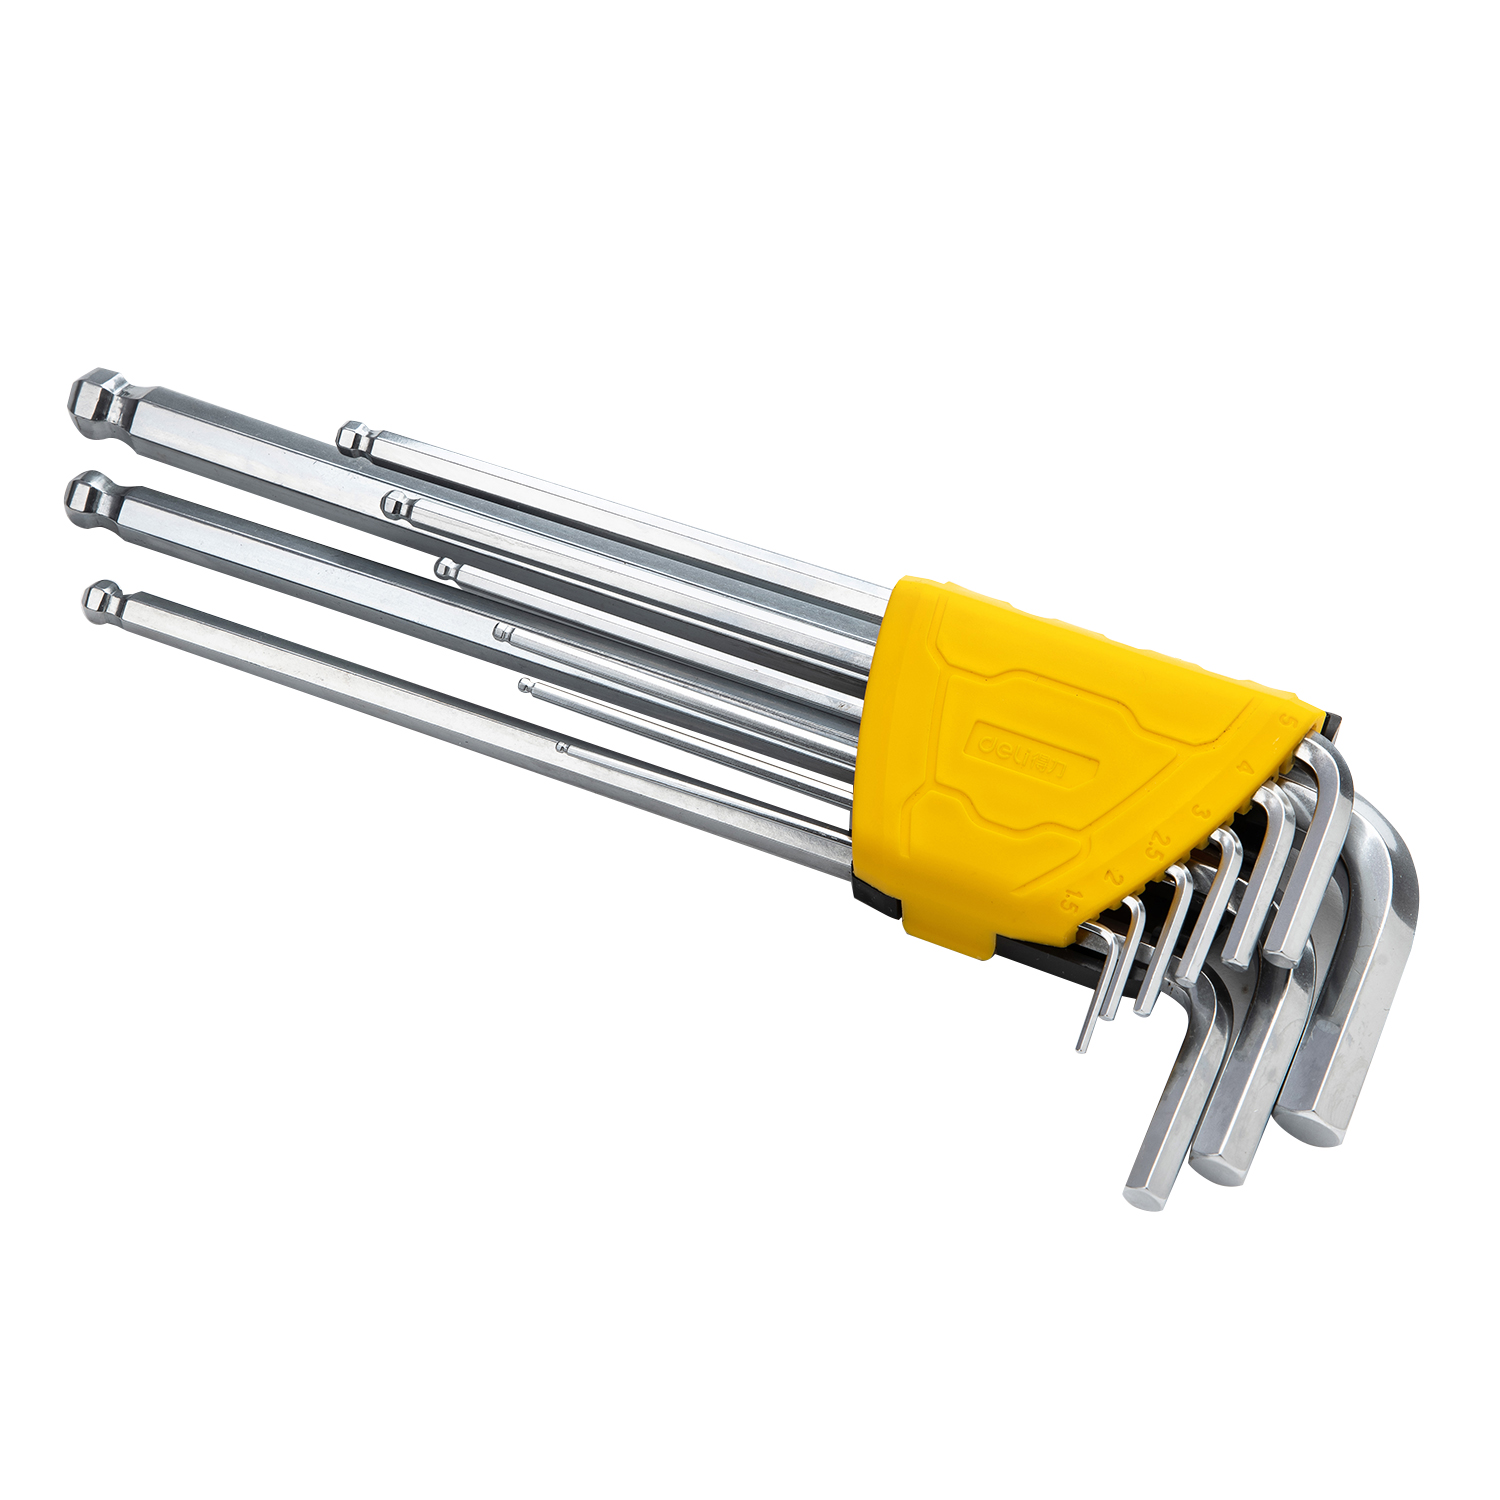 insulated Hex Keys with handles for Furniture Fitting